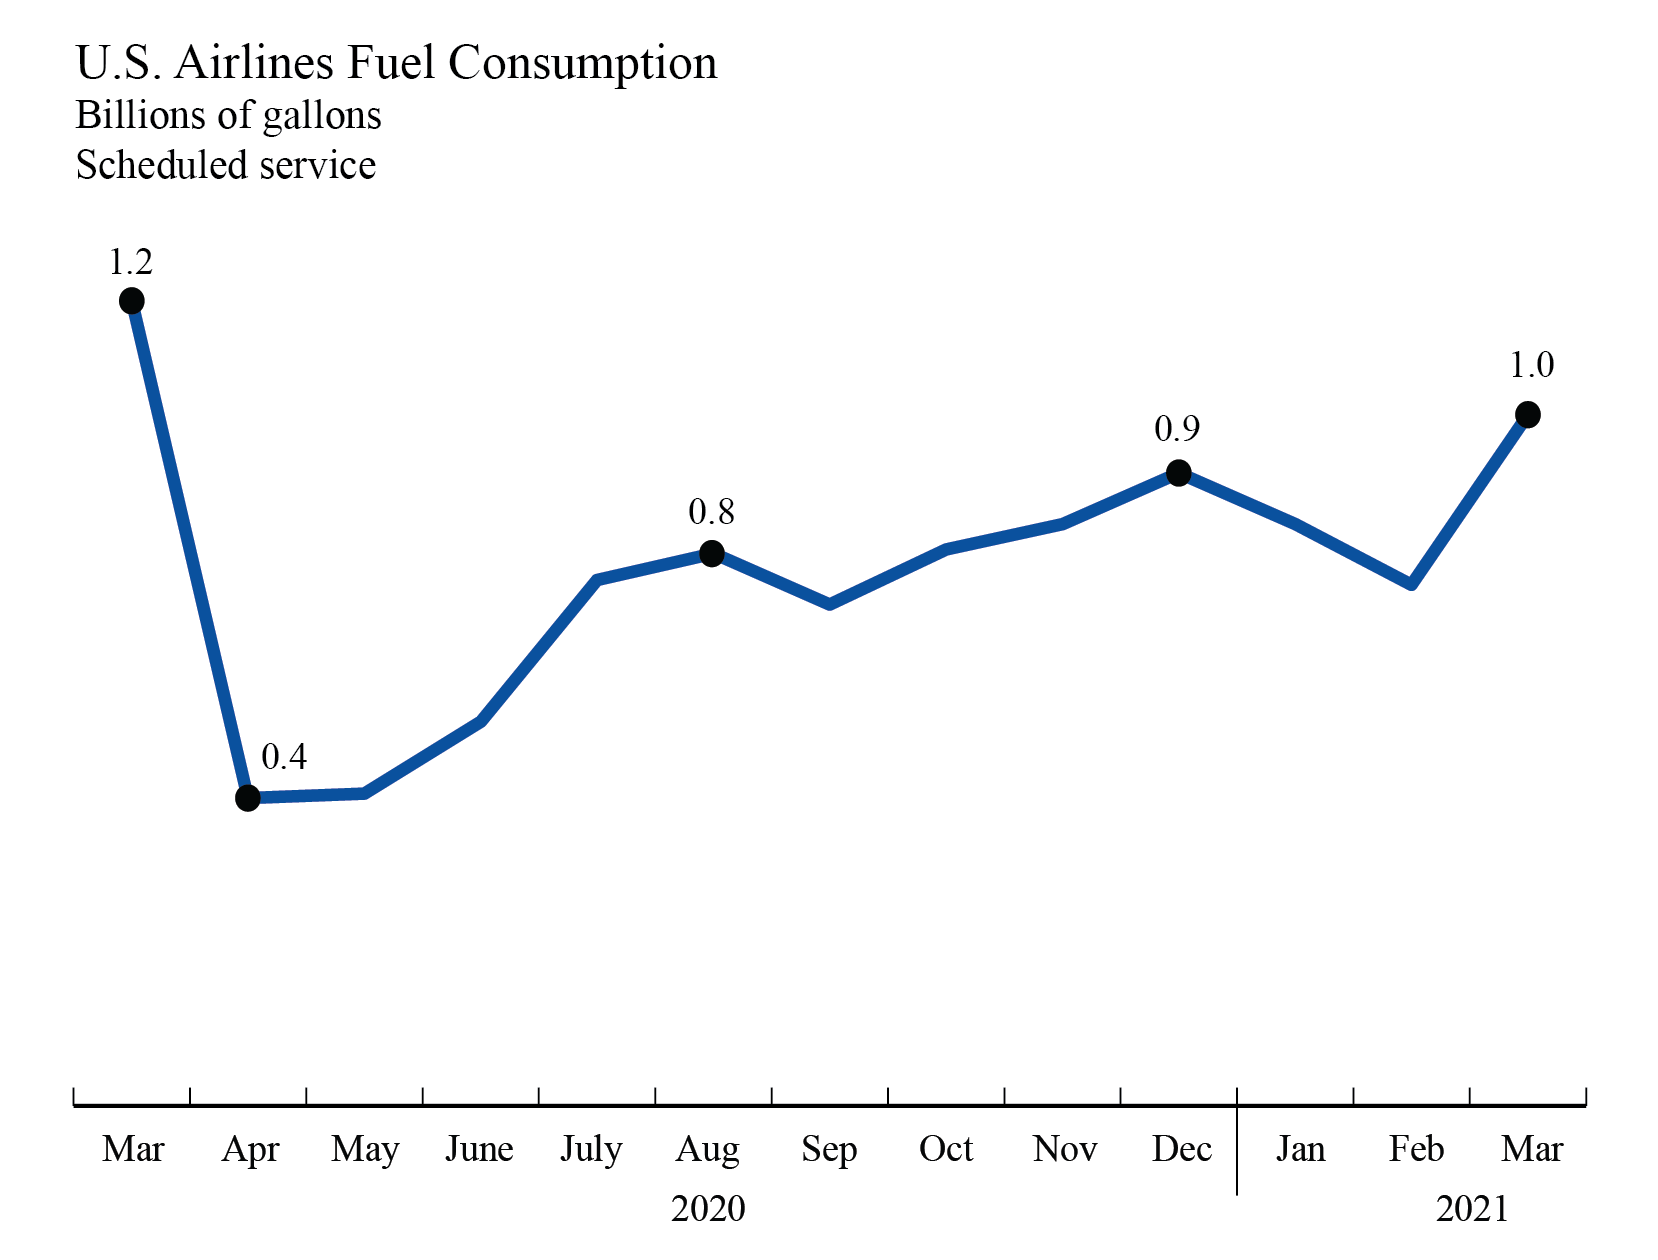 fuel consumption, airlines, march 2021